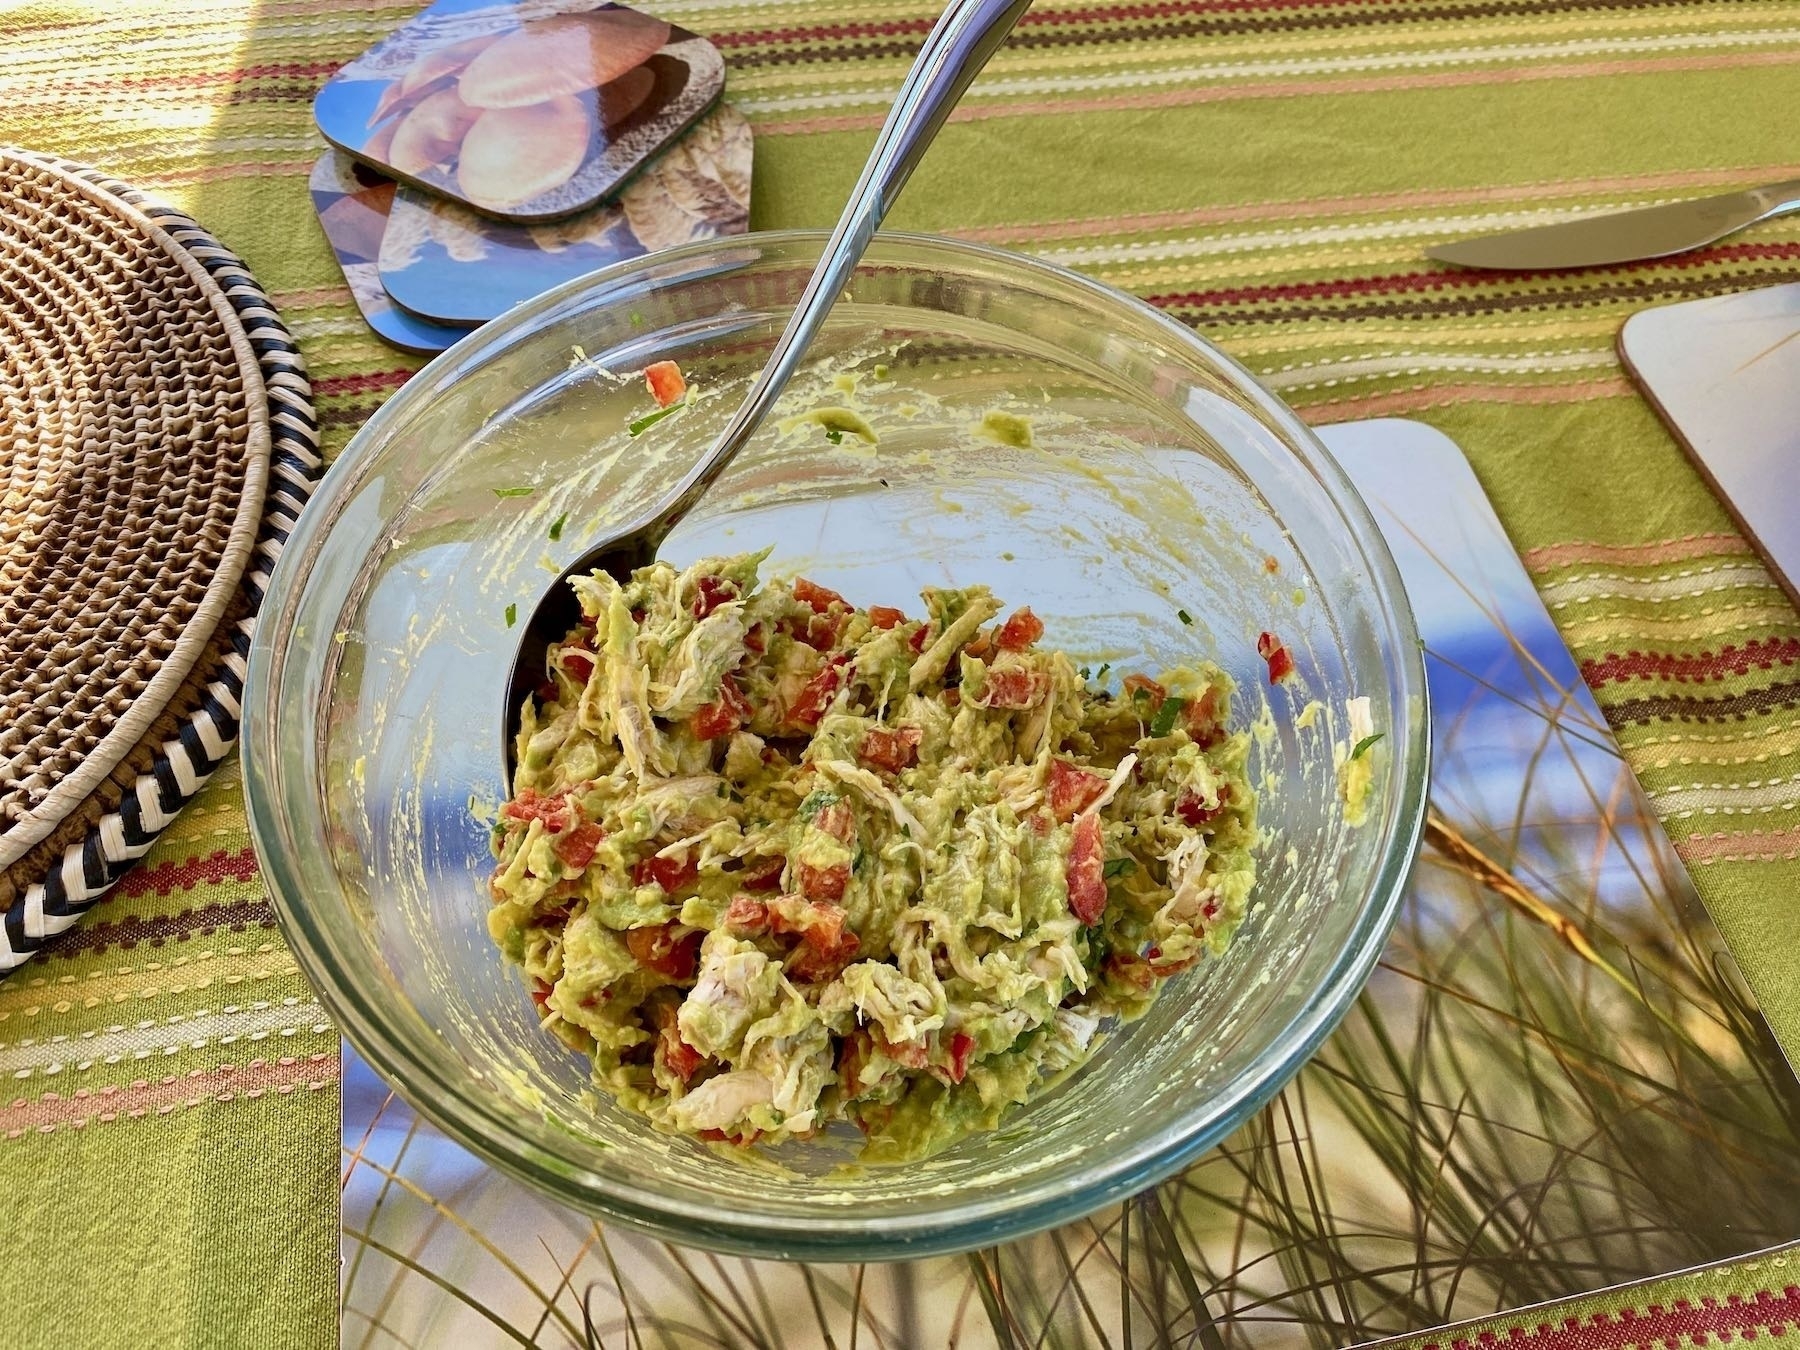 The avocado and chicken mix. 